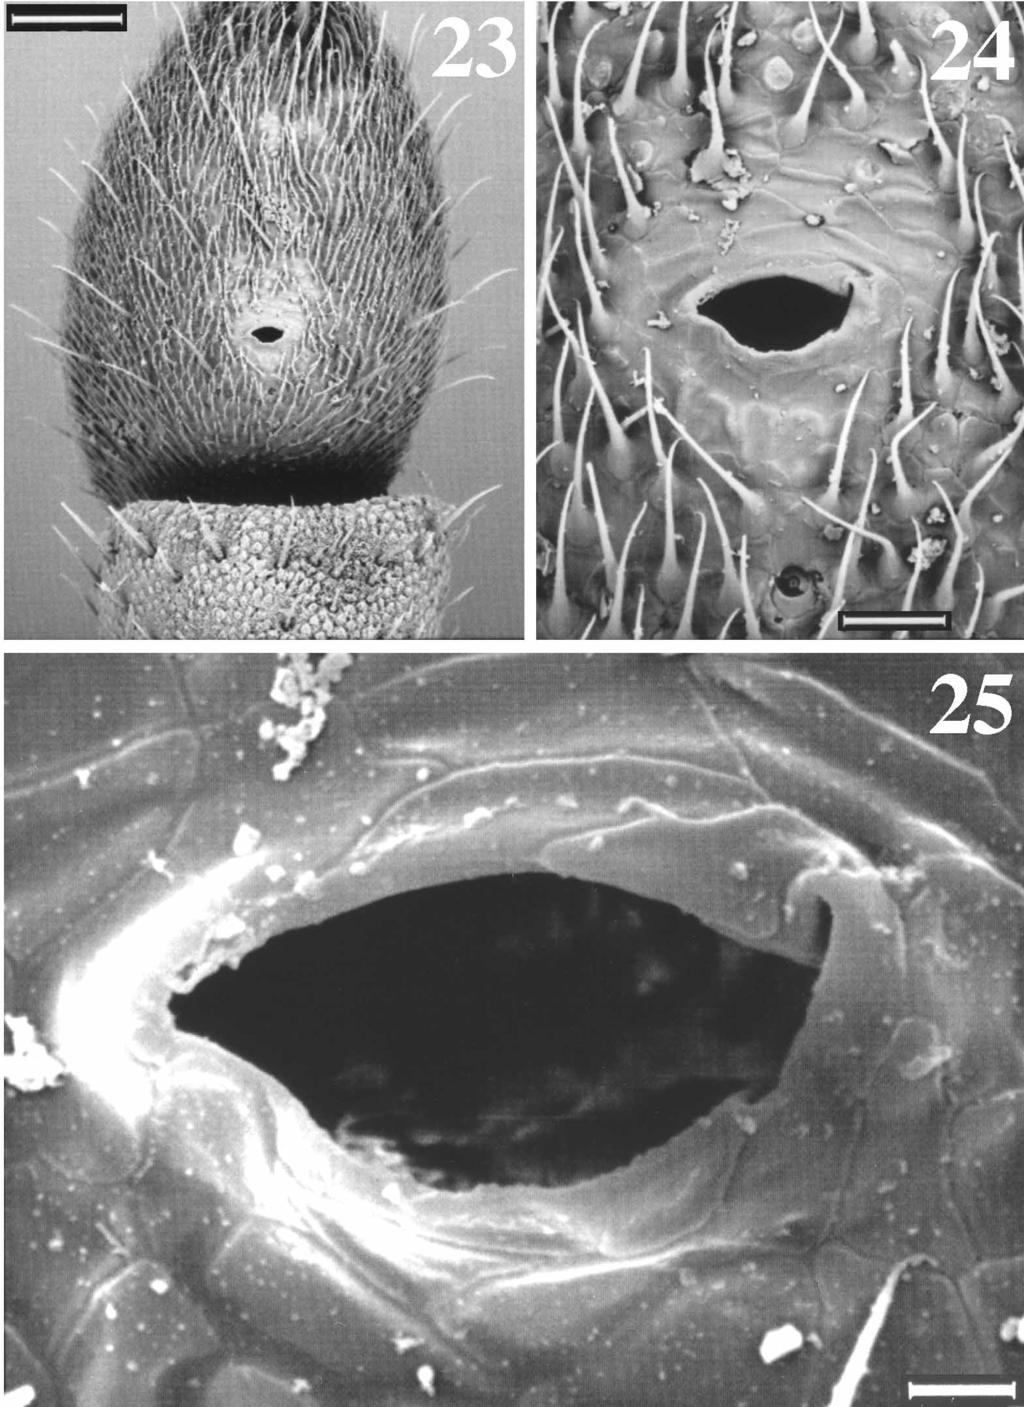 ZOOTAXA FIGURES 23 25.?Martensiellus n. g. sp., female from Kaharian. SEM-micrographs of right tarsus I showing dorsal pore at different enlargements. Scale bars: 100 µm (23), 20 µm (24), 5 µm (25).